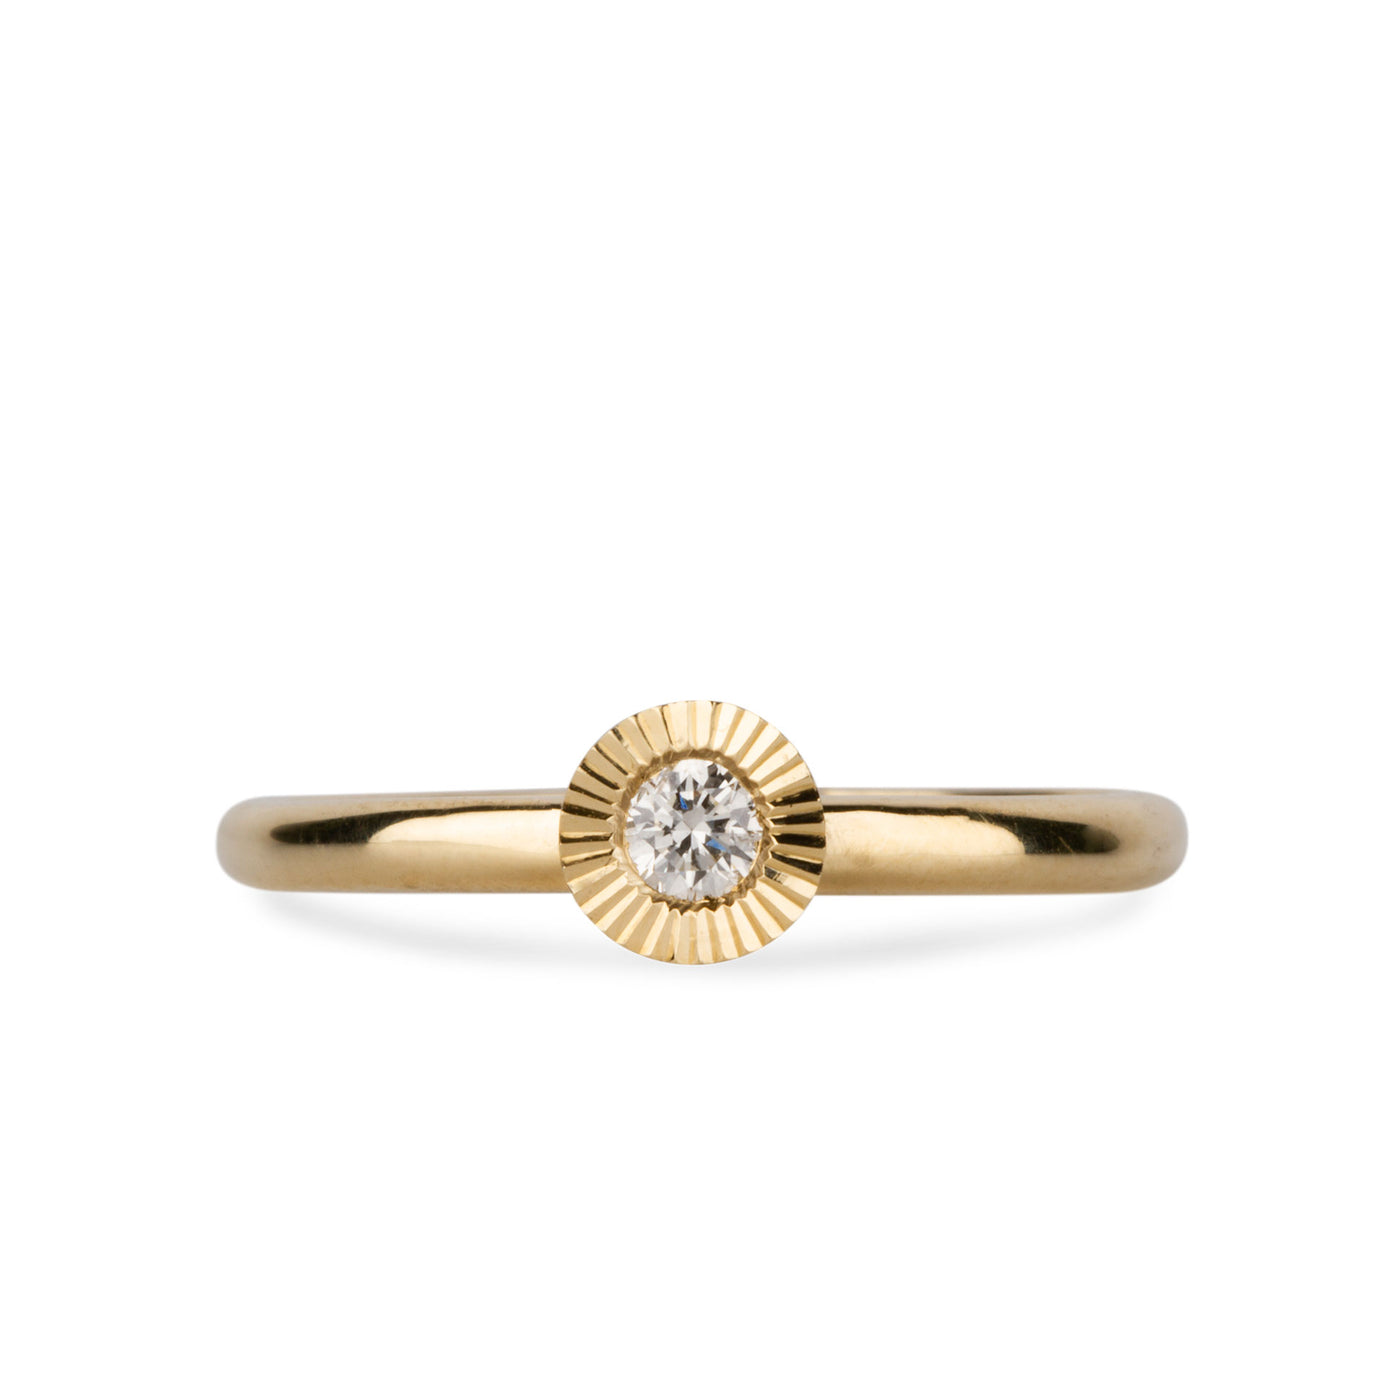 14k yellow gold large aurora stacking ring with a 3mm center diamond and engraved border